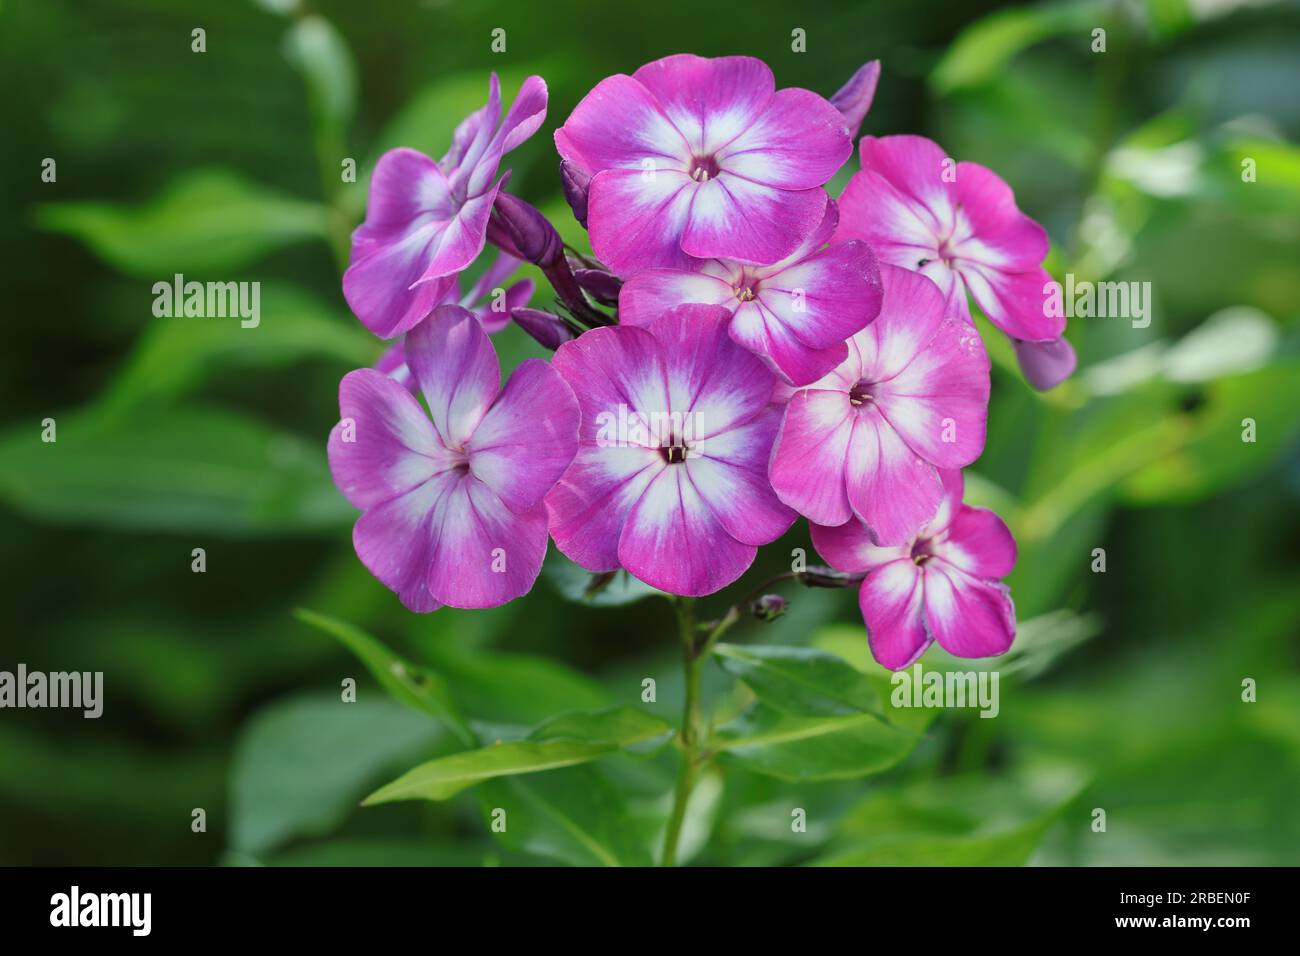 Close-up of a two-tone phlox paniculata flower with purple and white colorations in a garden bed, selctive focus, green blurry background Stock Photo